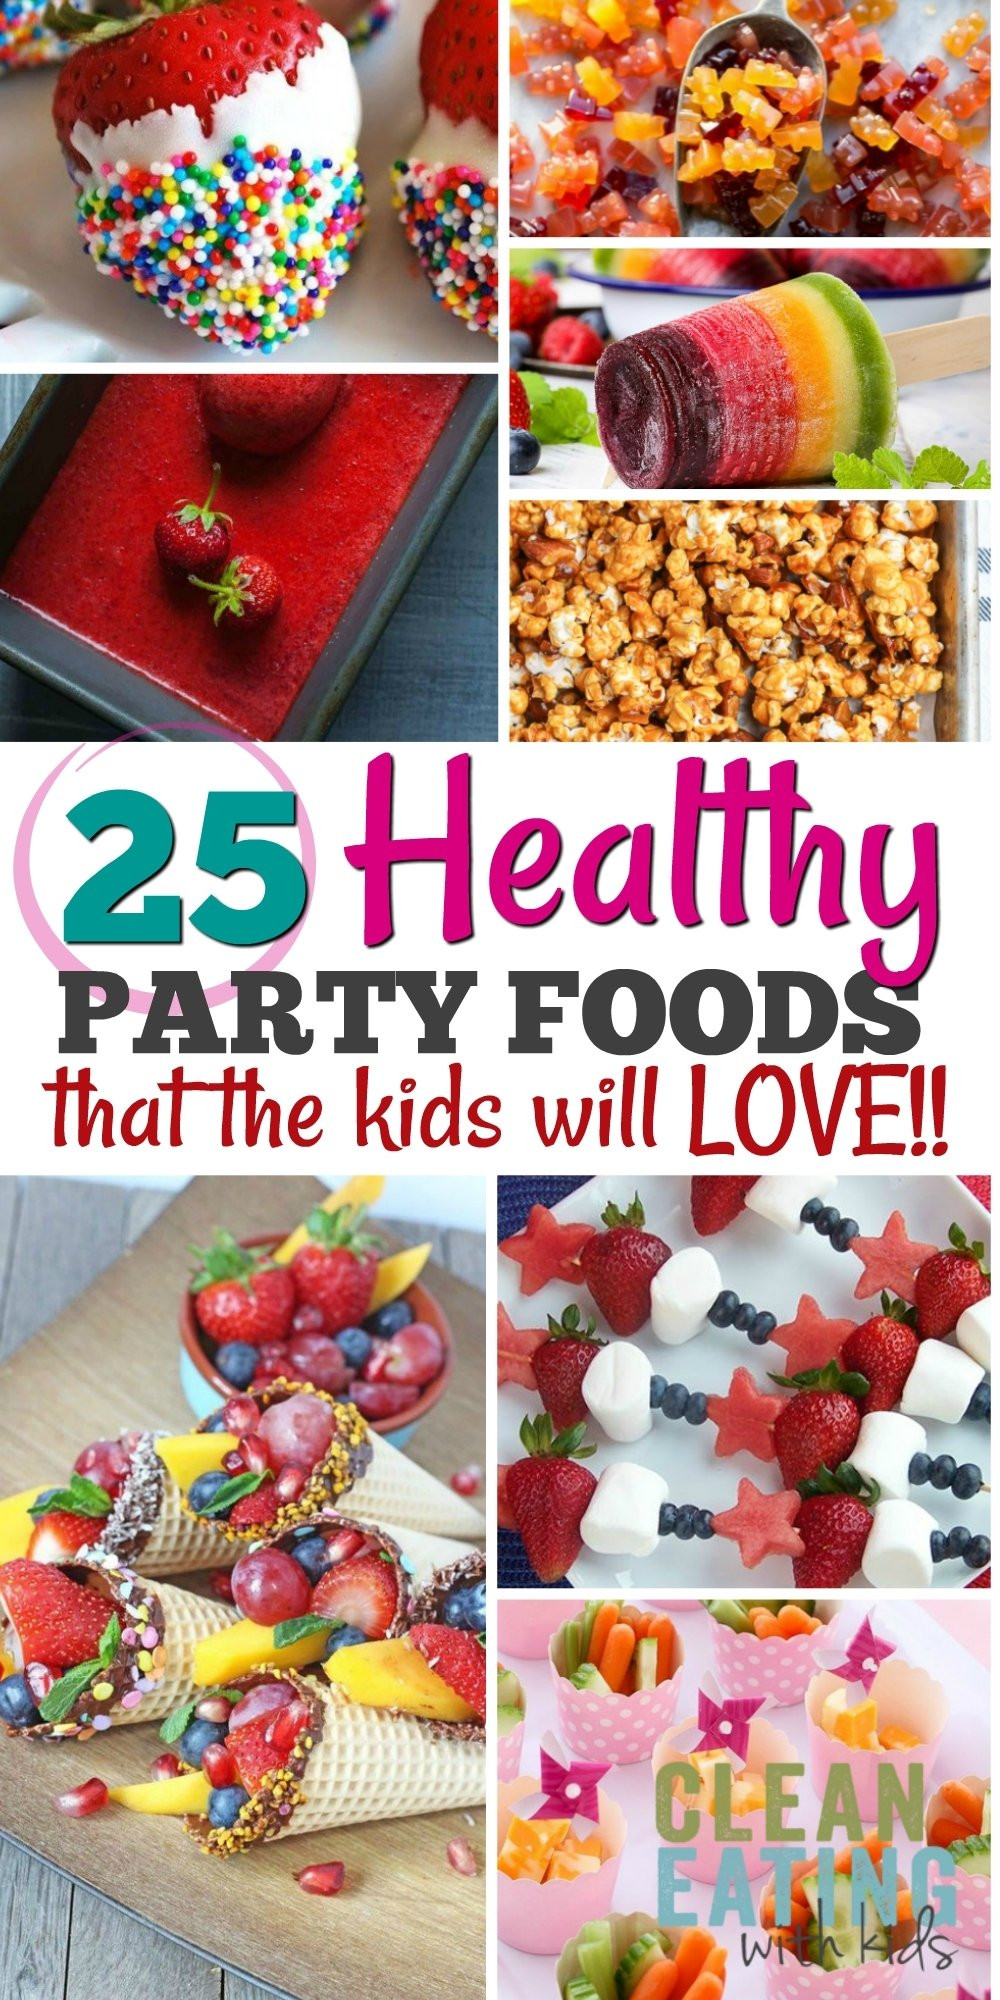 Cheap Food Ideas For Party
 10 Nice Cheap Food Ideas For Birthday Parties 2020